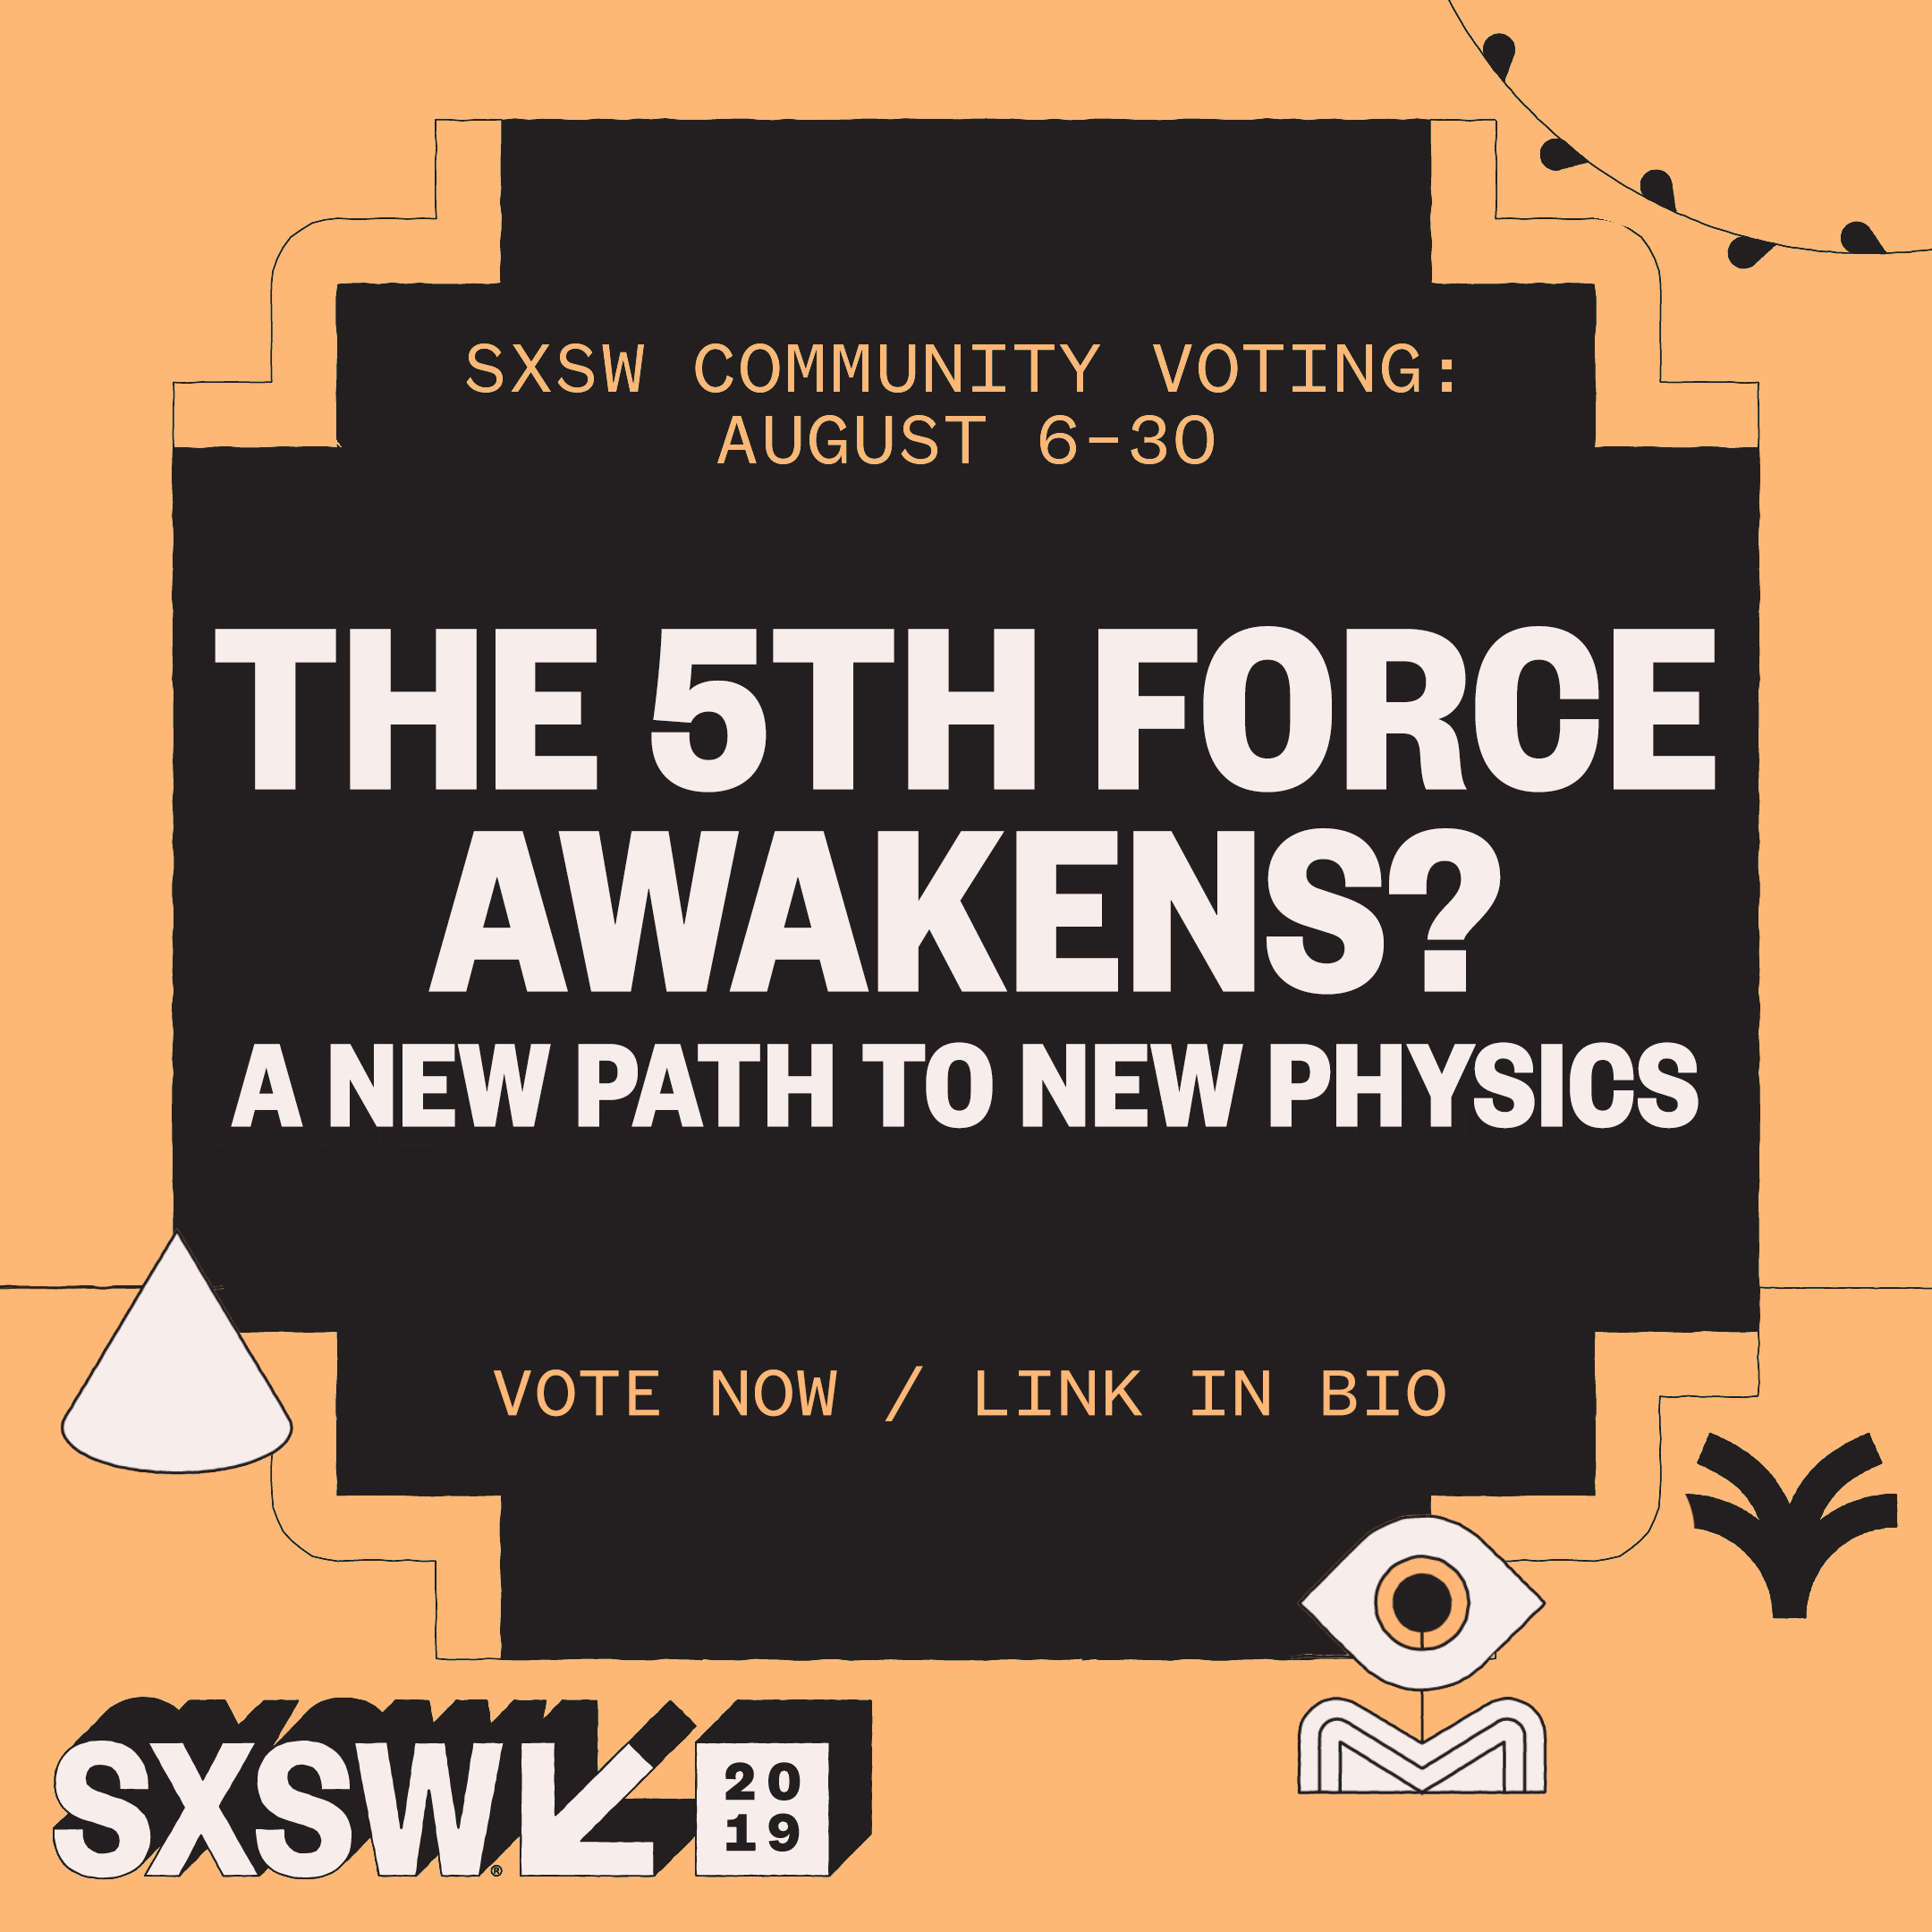 The 5th Force Awakens? A New Path to New Physics